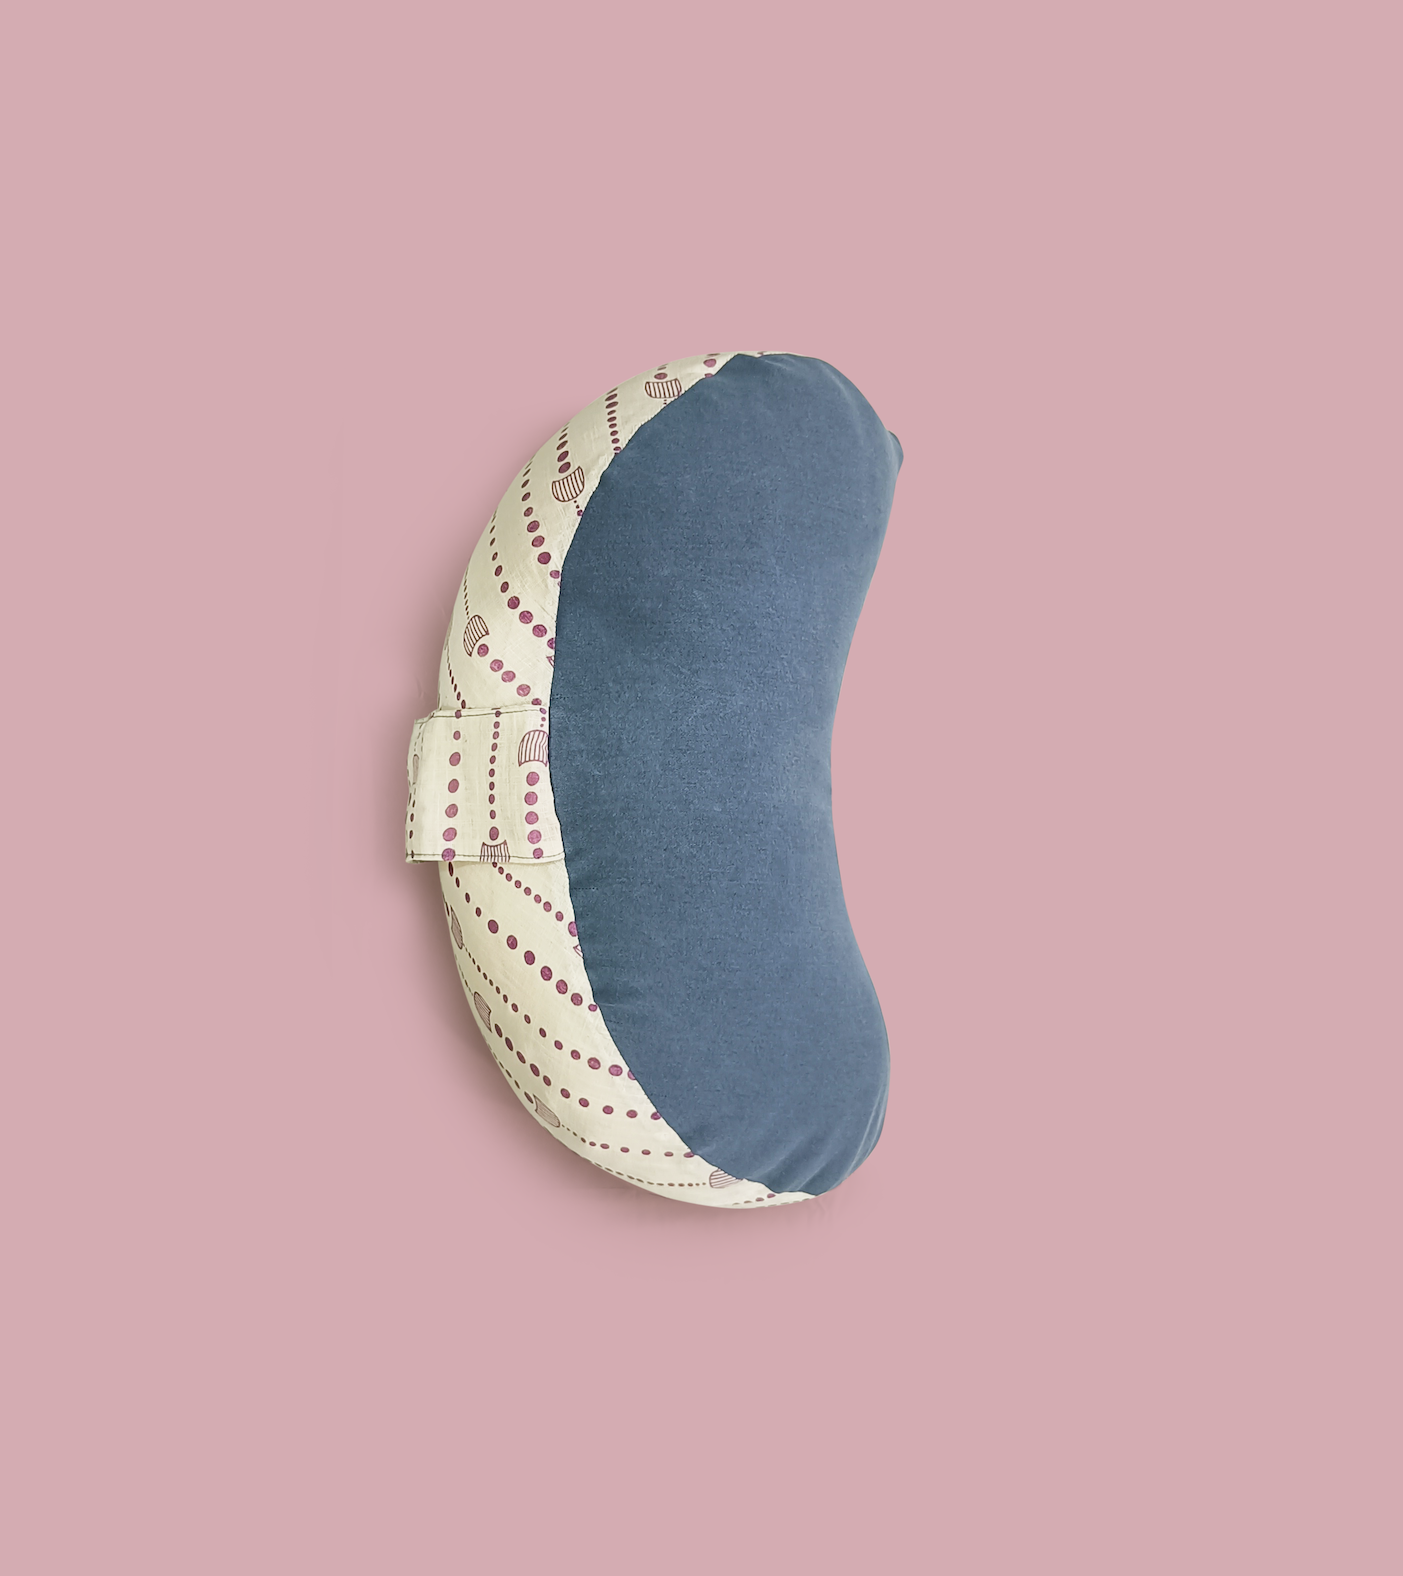 Crescent half moon meditation cushion made from recycled materials